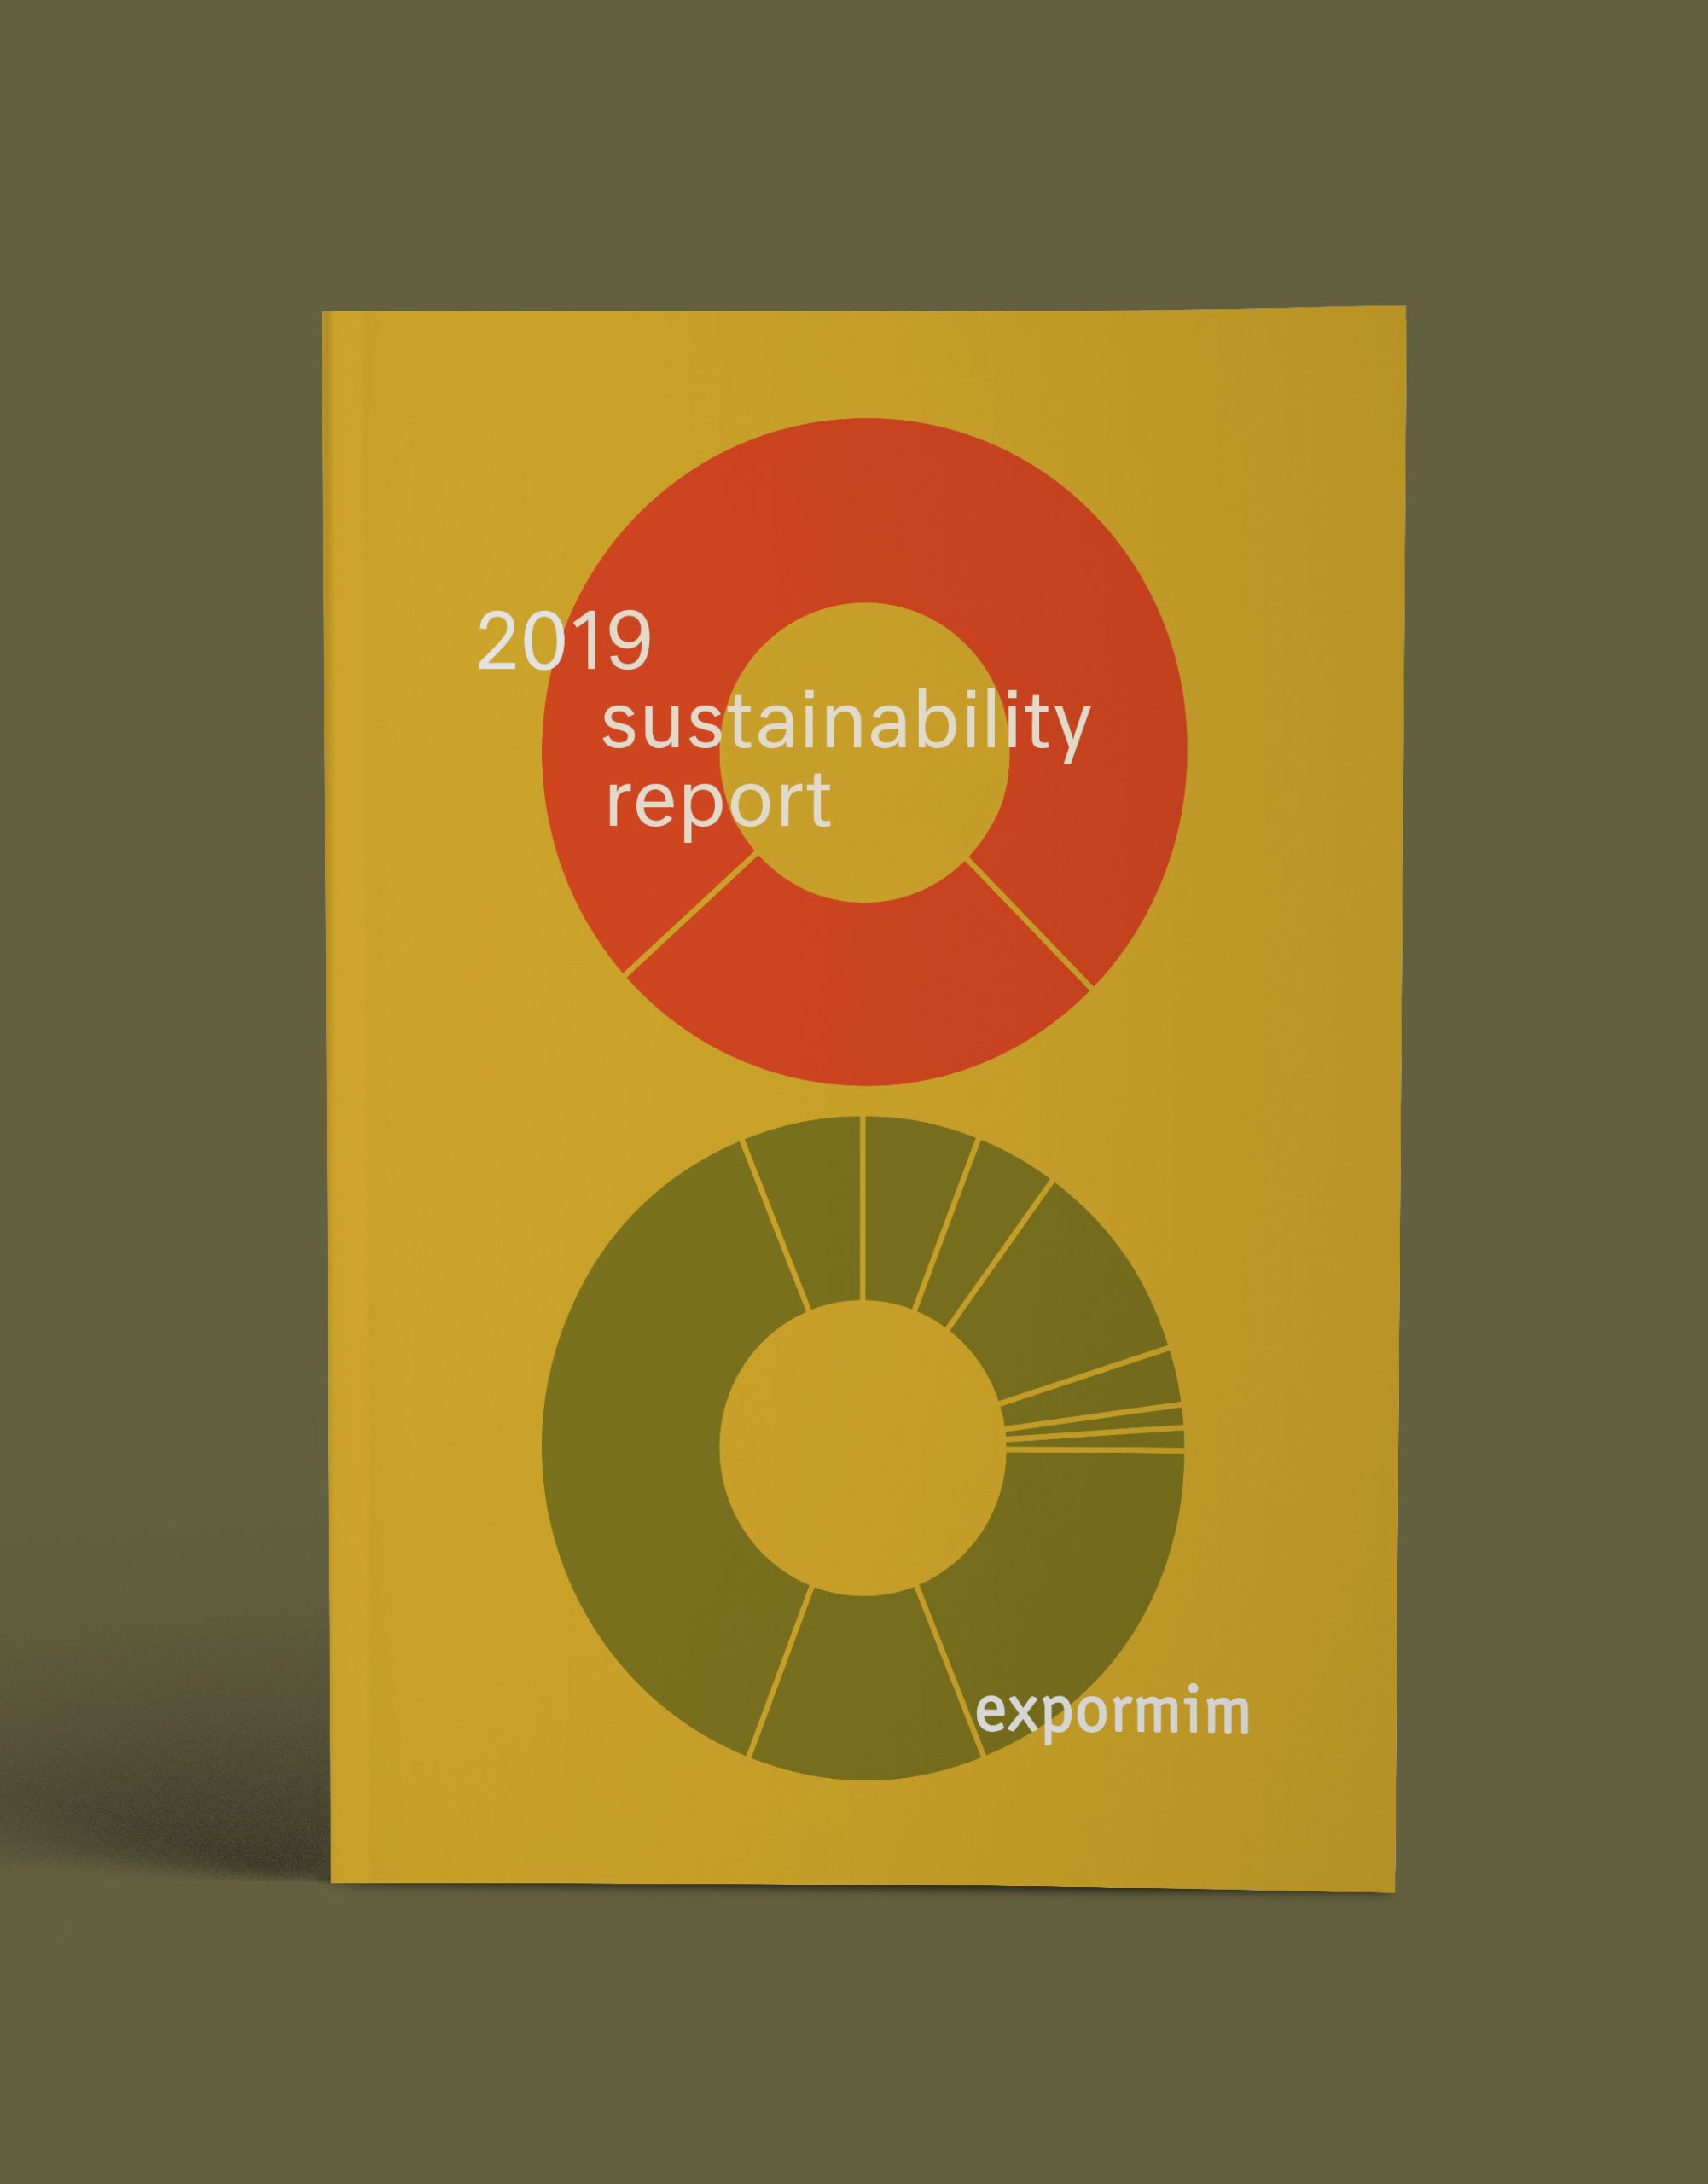 corporate responsability - sustainability report